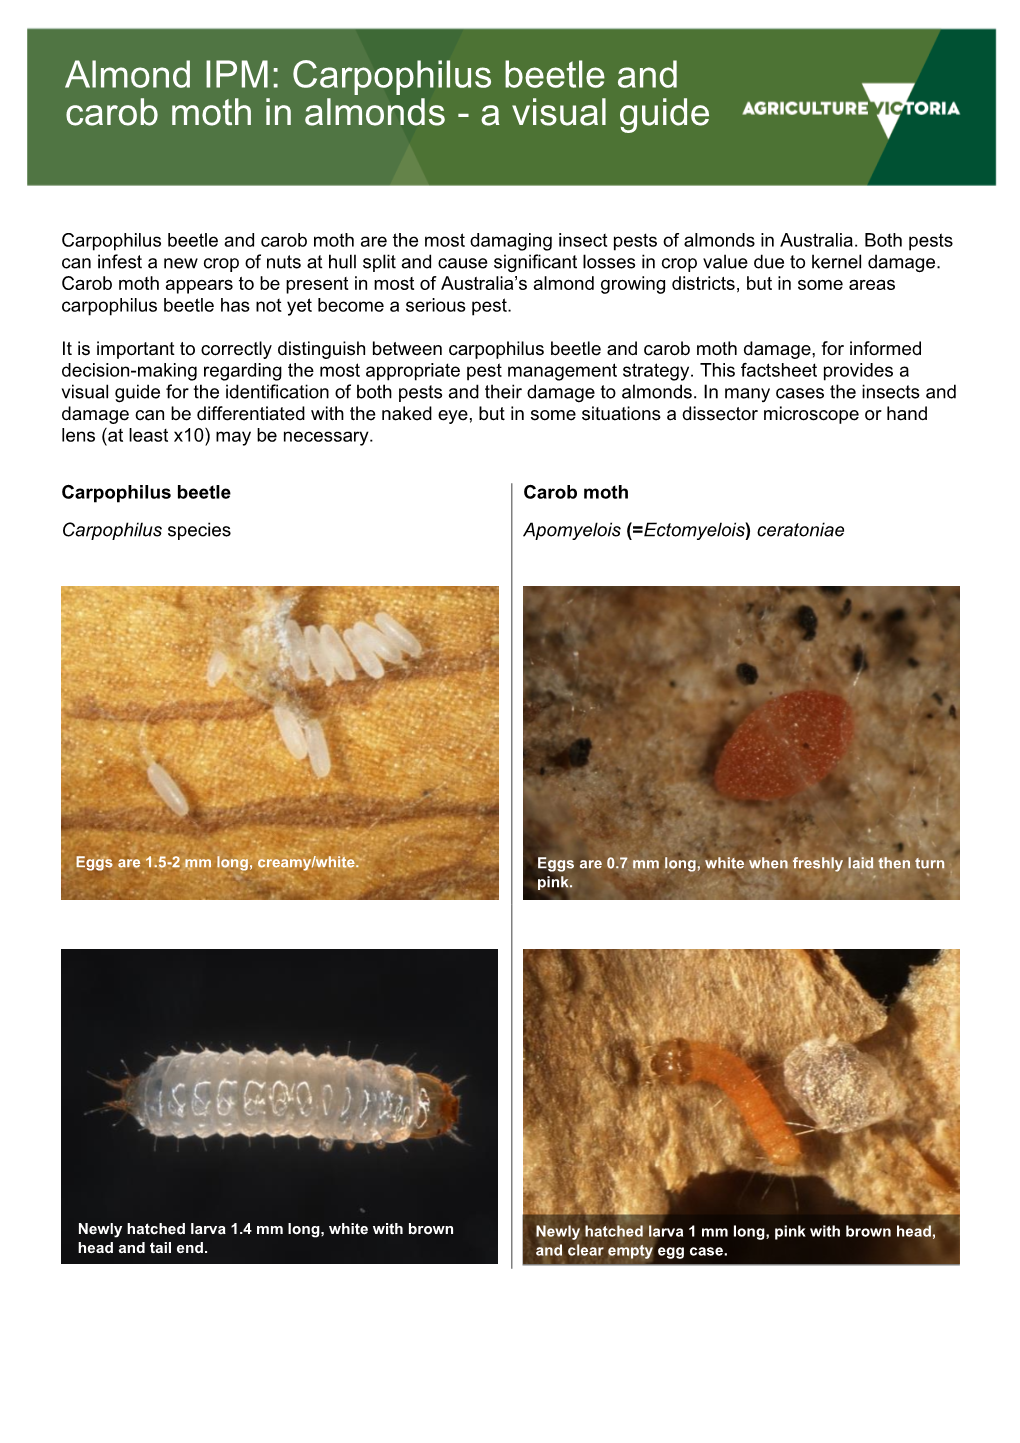 Carpophilus Beetle and Carob Moth in Almonds - a Visual Guide